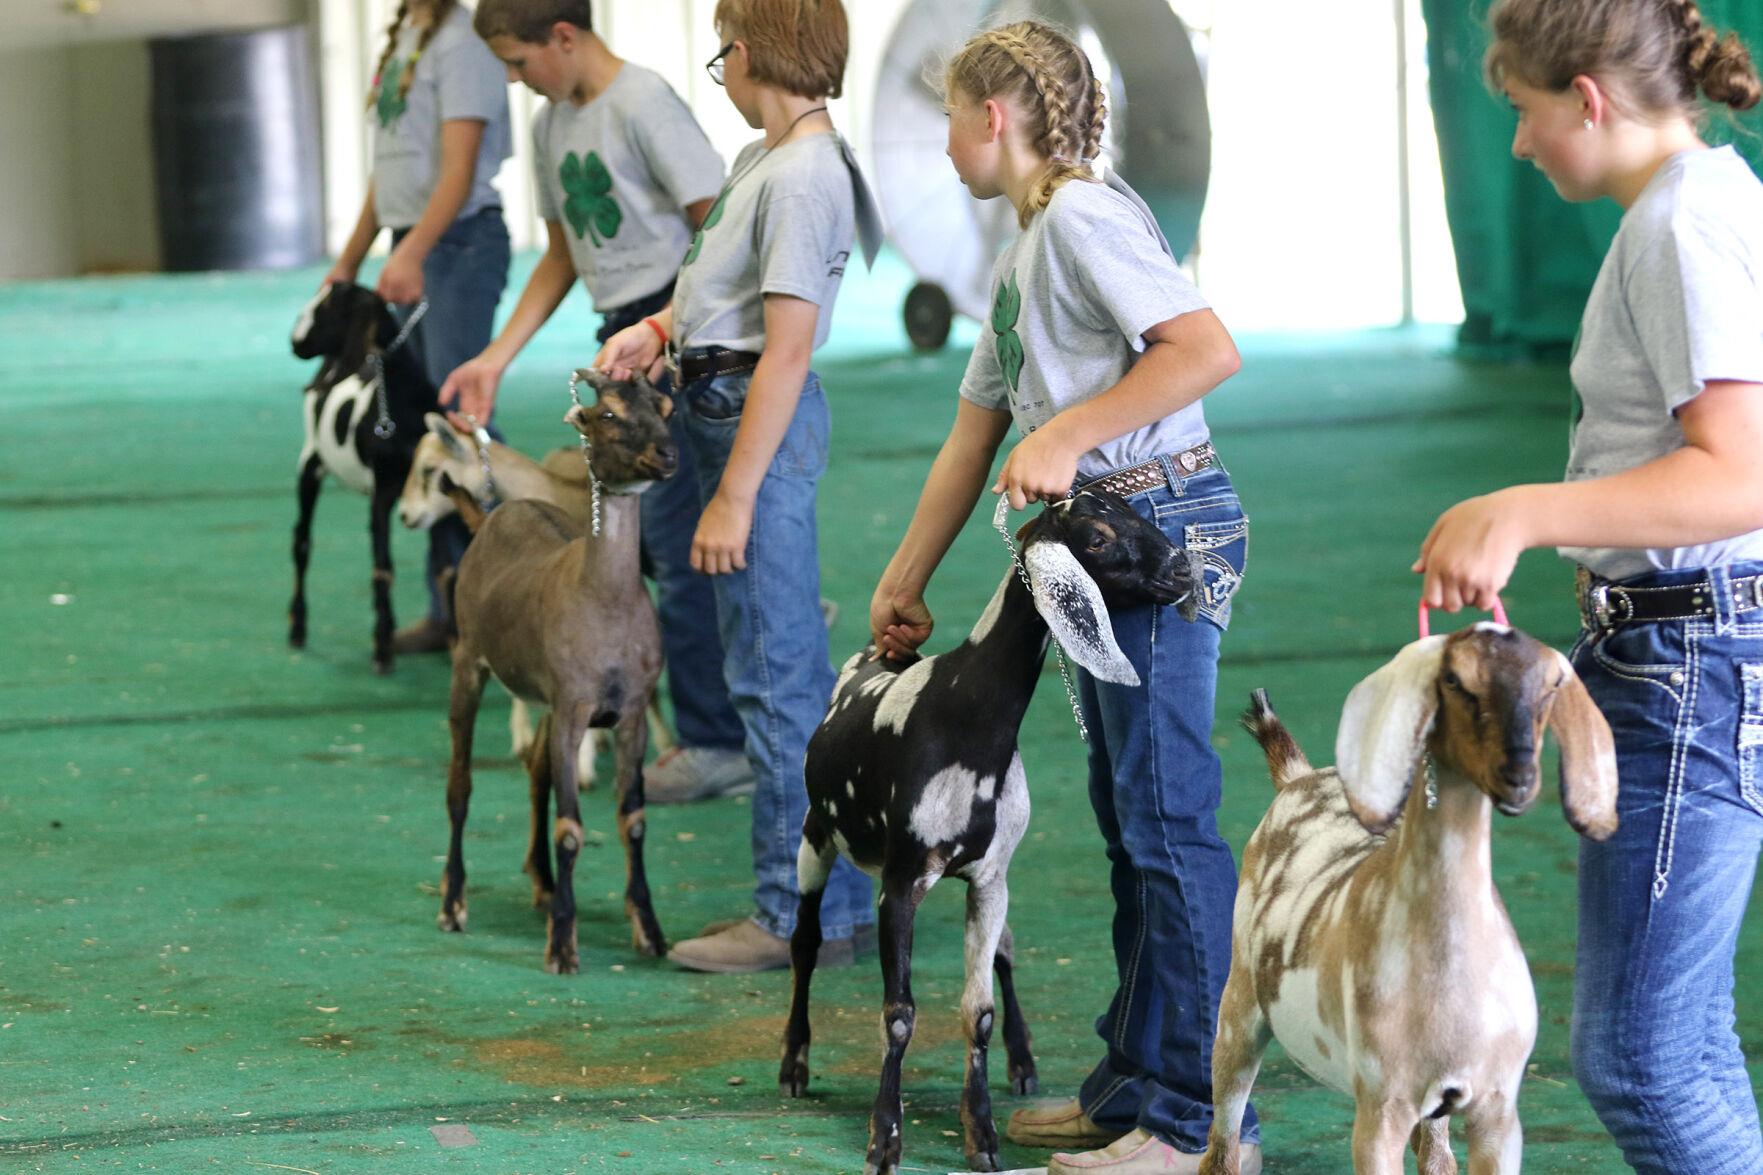 Lincoln County Fair returns without any restrictions in 2022